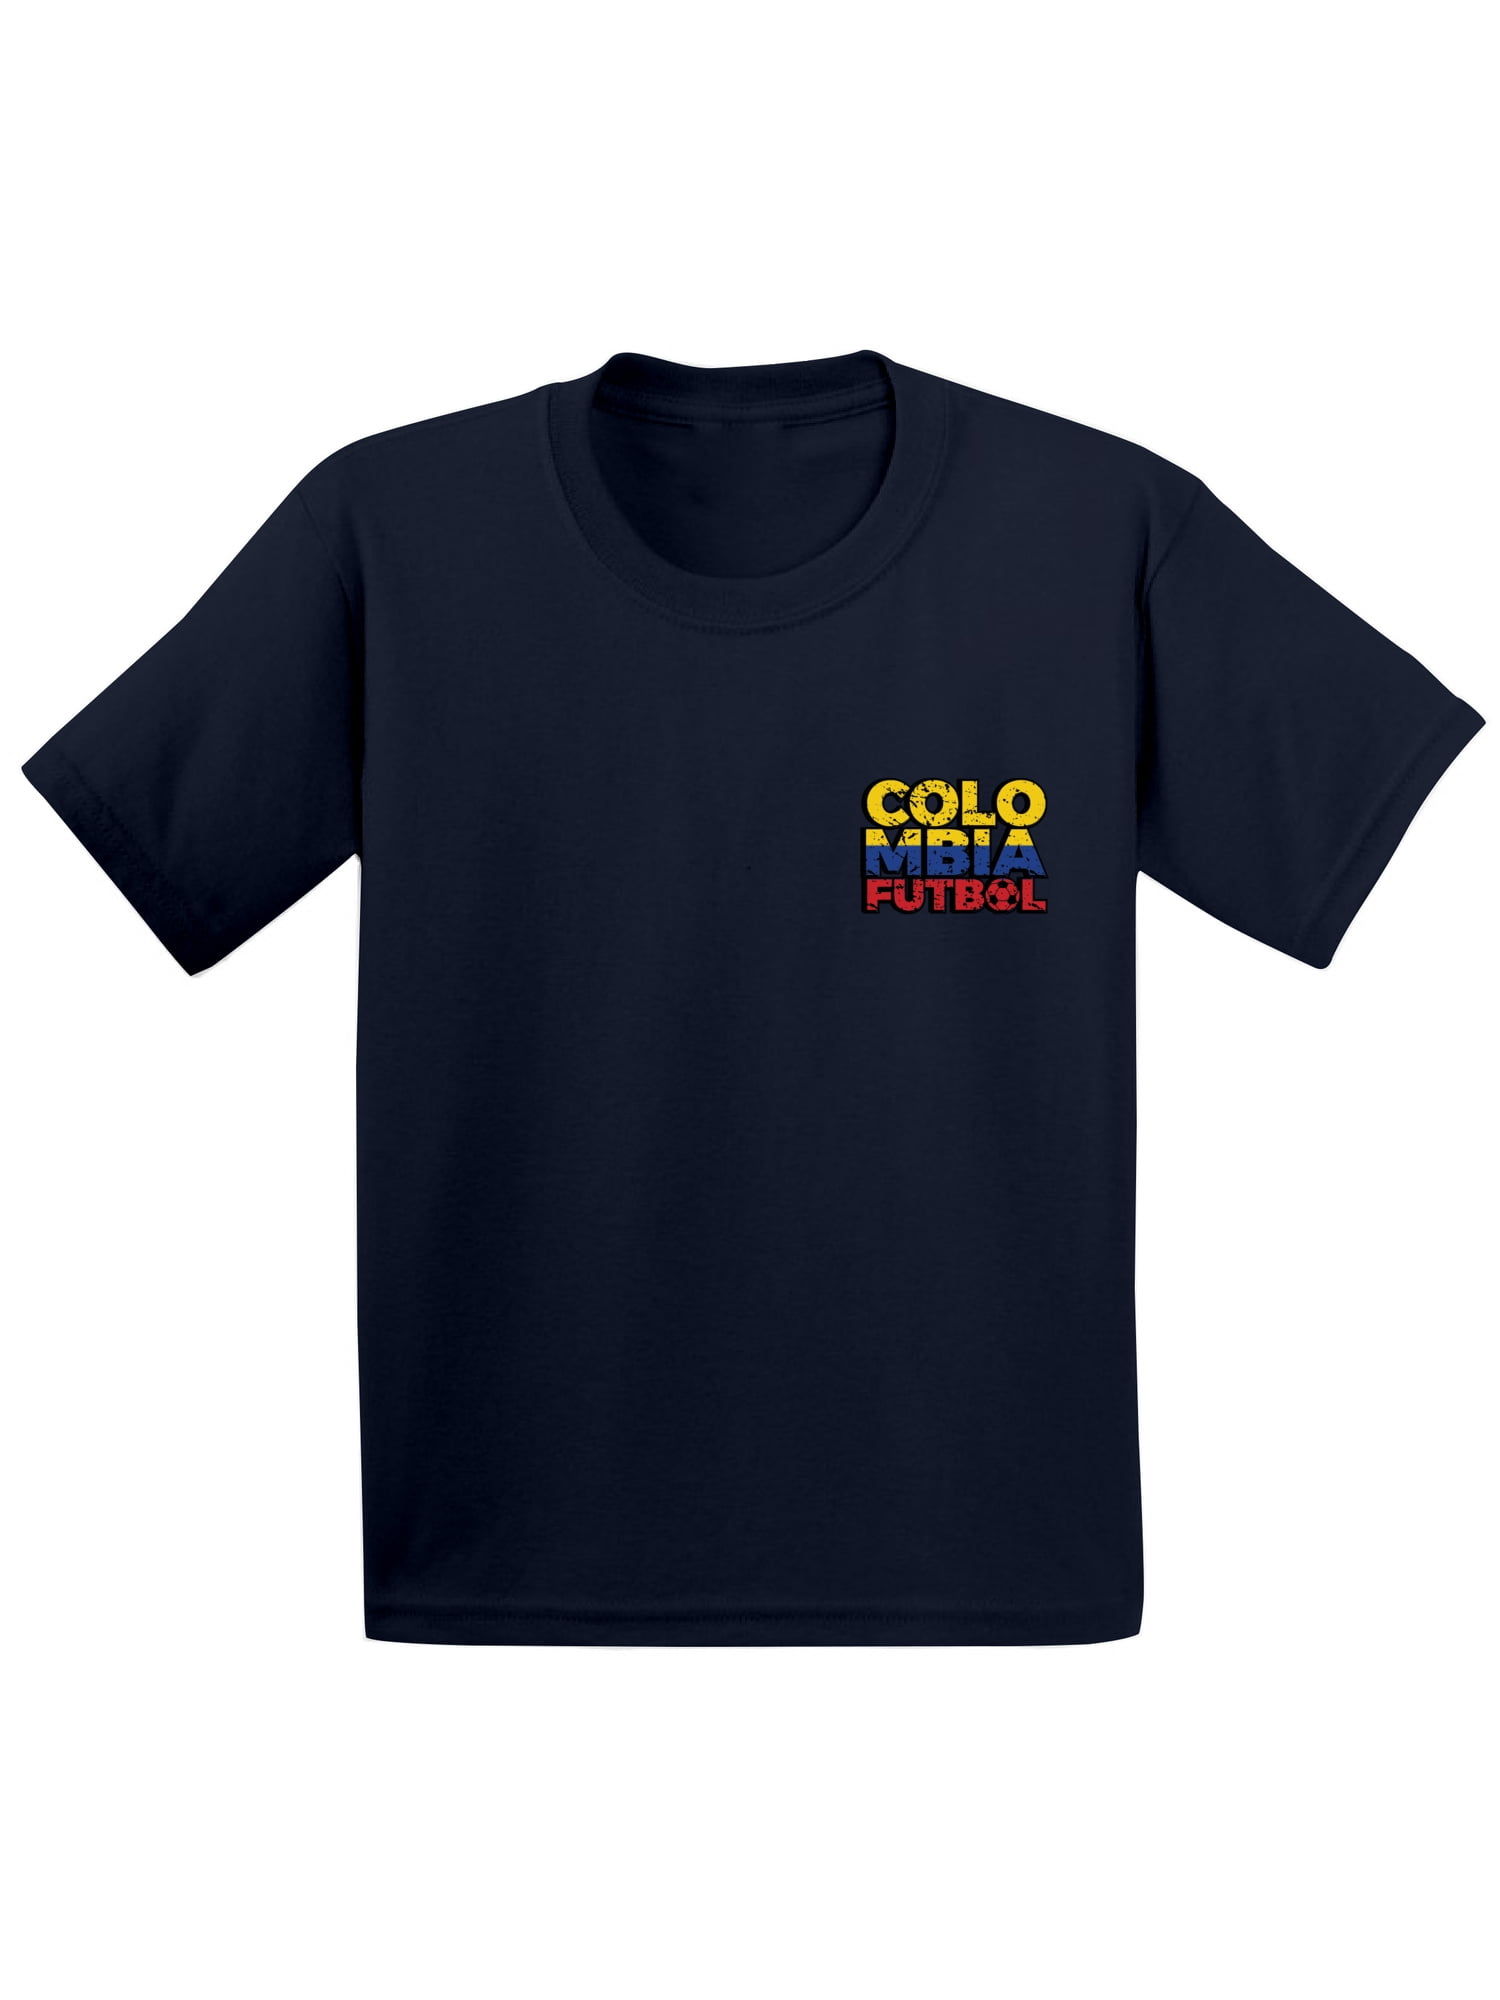 baby colombia soccer jersey